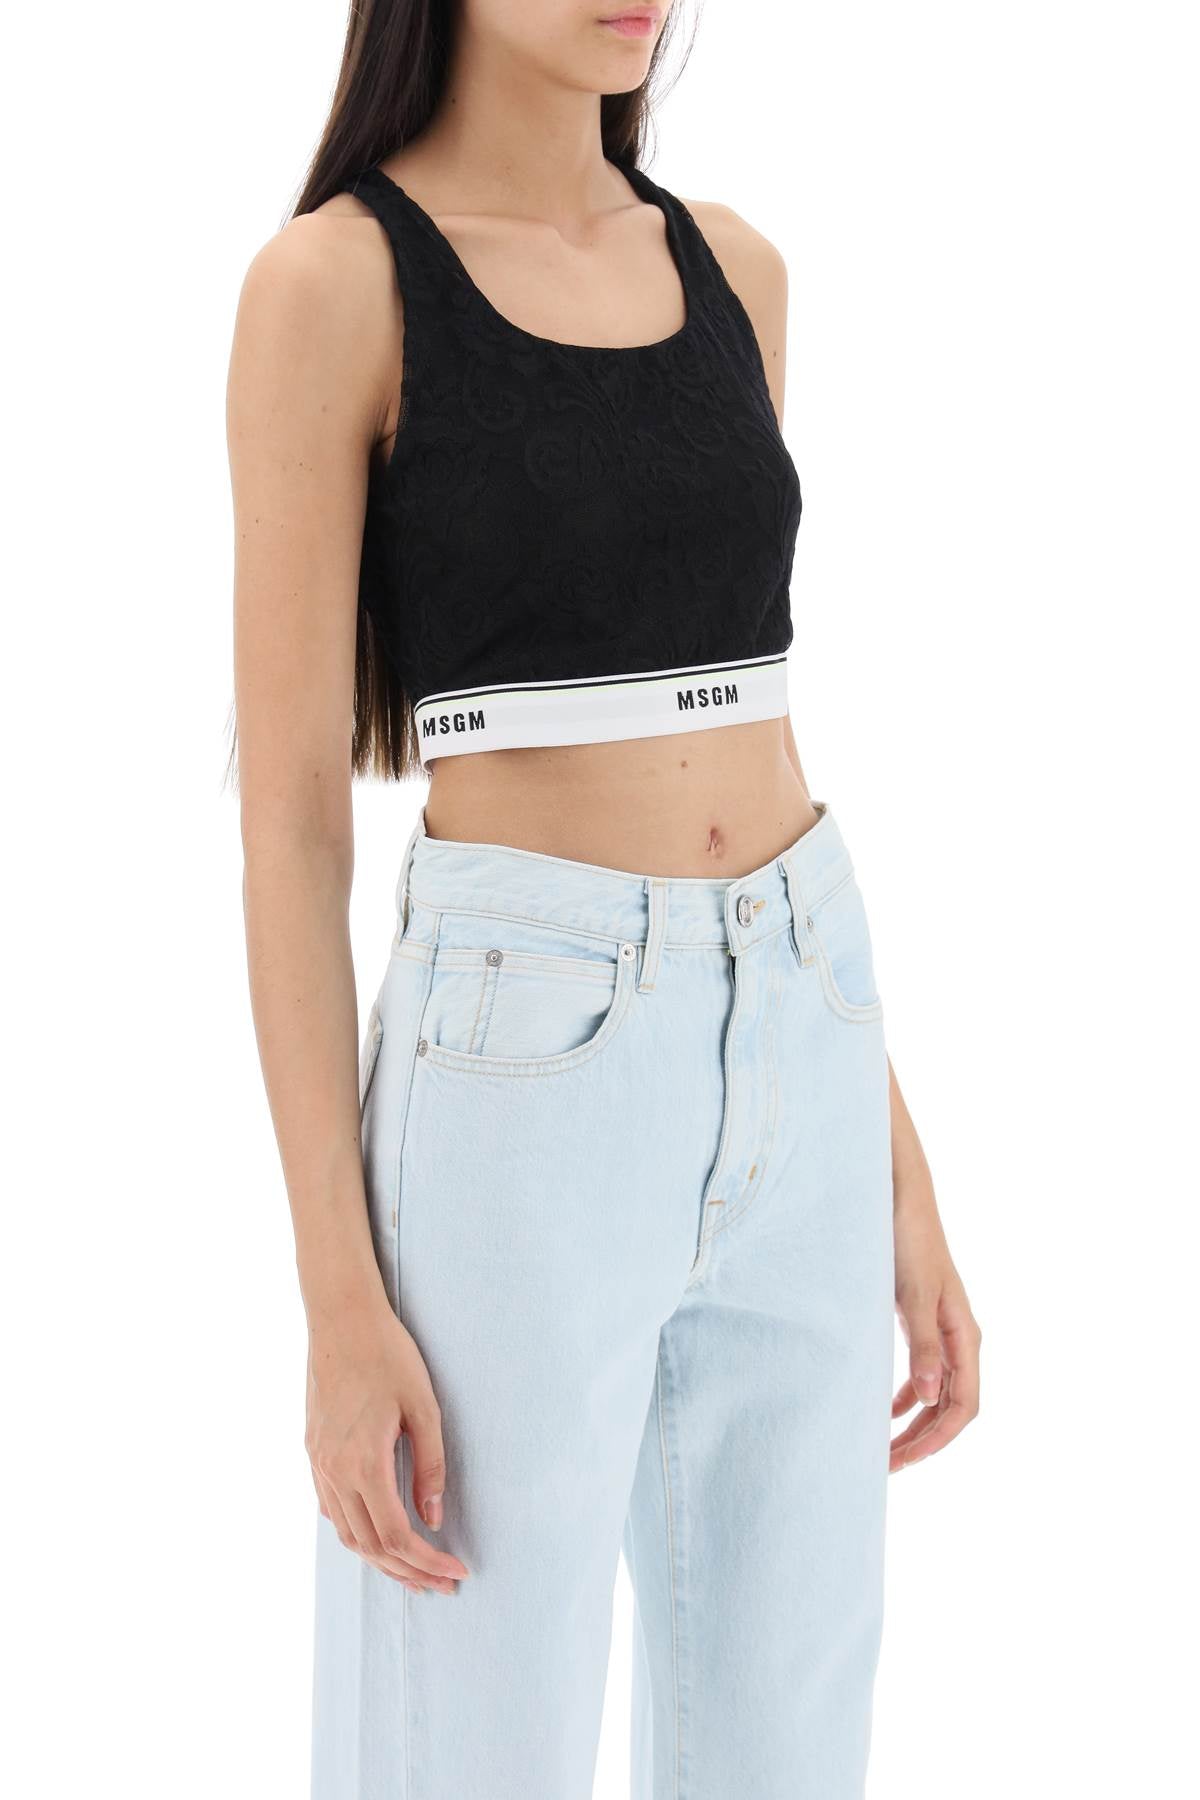 MSGM Msgm sports bra in lace with logoed band